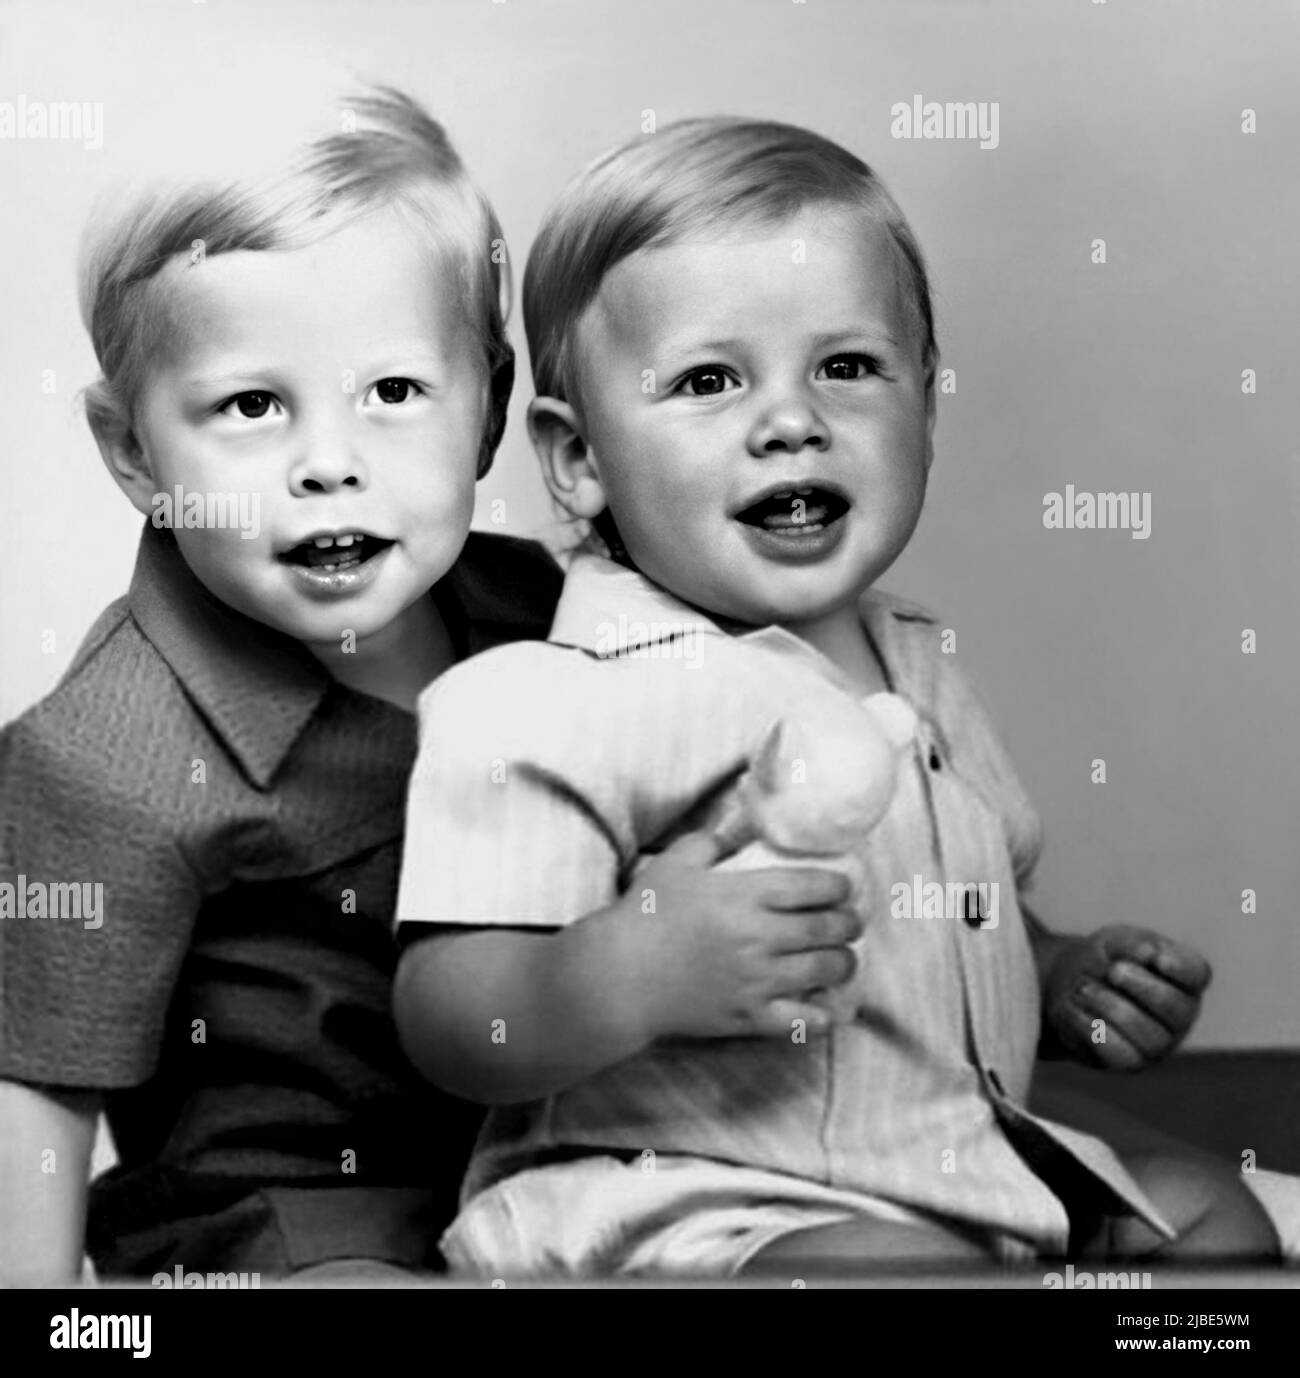 1974 ca, Pretoria , SOUTH AFRICA : The celebrated american ELON Reeve MUSK ( born in Pretoria, 28 june 1971 ) when was a young boy aged 3 with his little brother KIMBAL ( born in 1972 ).  South African born, naturalizated U.S.  business magnate , investor and media proprietor founder of  PAY PAL company , founder of SpaceX , CEO and product architect of TESLA , Inc. . Unknown photographer .- INFORMATICA - INFORMATICO - INFORMATICS - COMPUTER TECHNOLOGY  - HISTORY - FOTO STORICHE - TYCOON - personalità da bambino bambini da giovane - personality personalities when was young - INFANZIA - CHILD Stock Photo